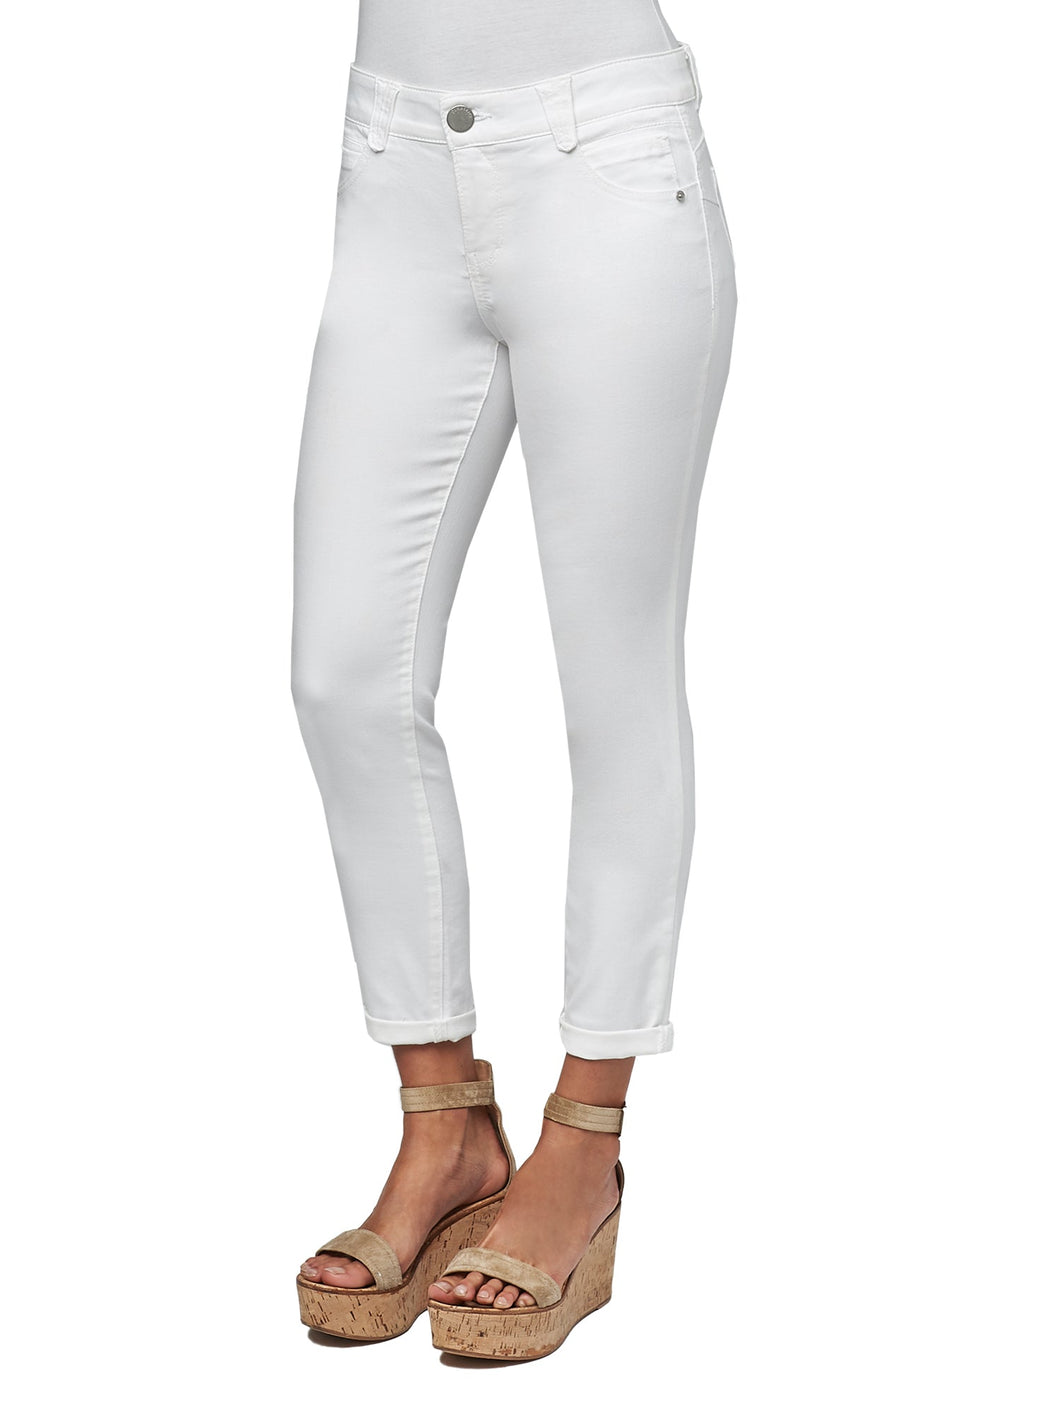 Absolution Ankle Jean - Optic White